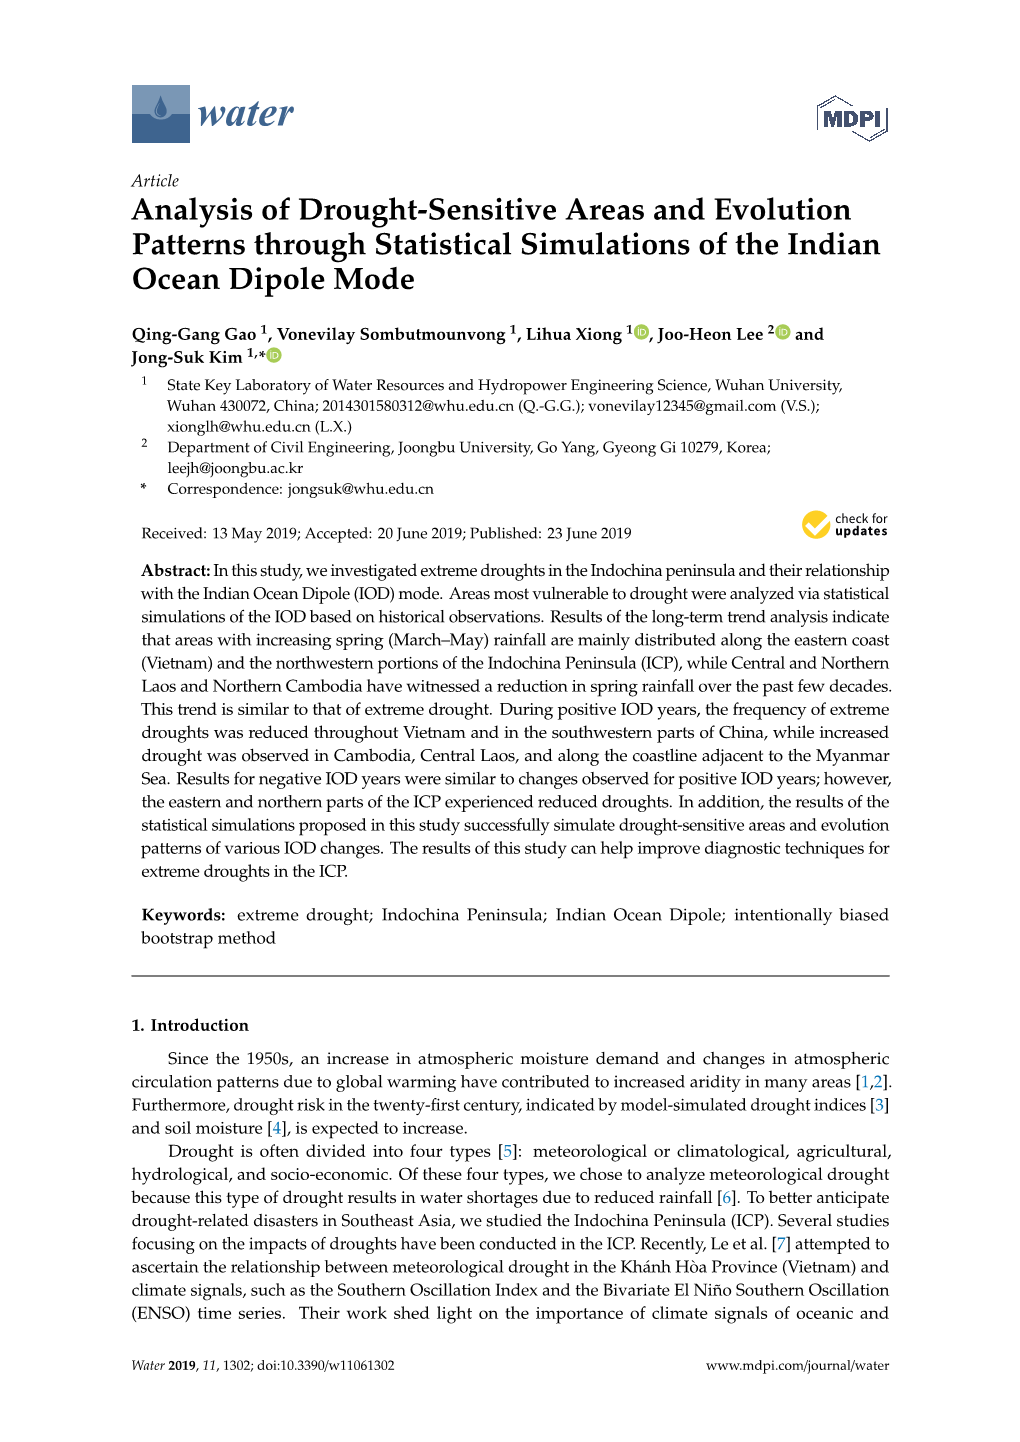 Analysis of Drought-Sensitive Areas and Evolution Patterns Through Statistical Simulations of the Indian Ocean Dipole Mode